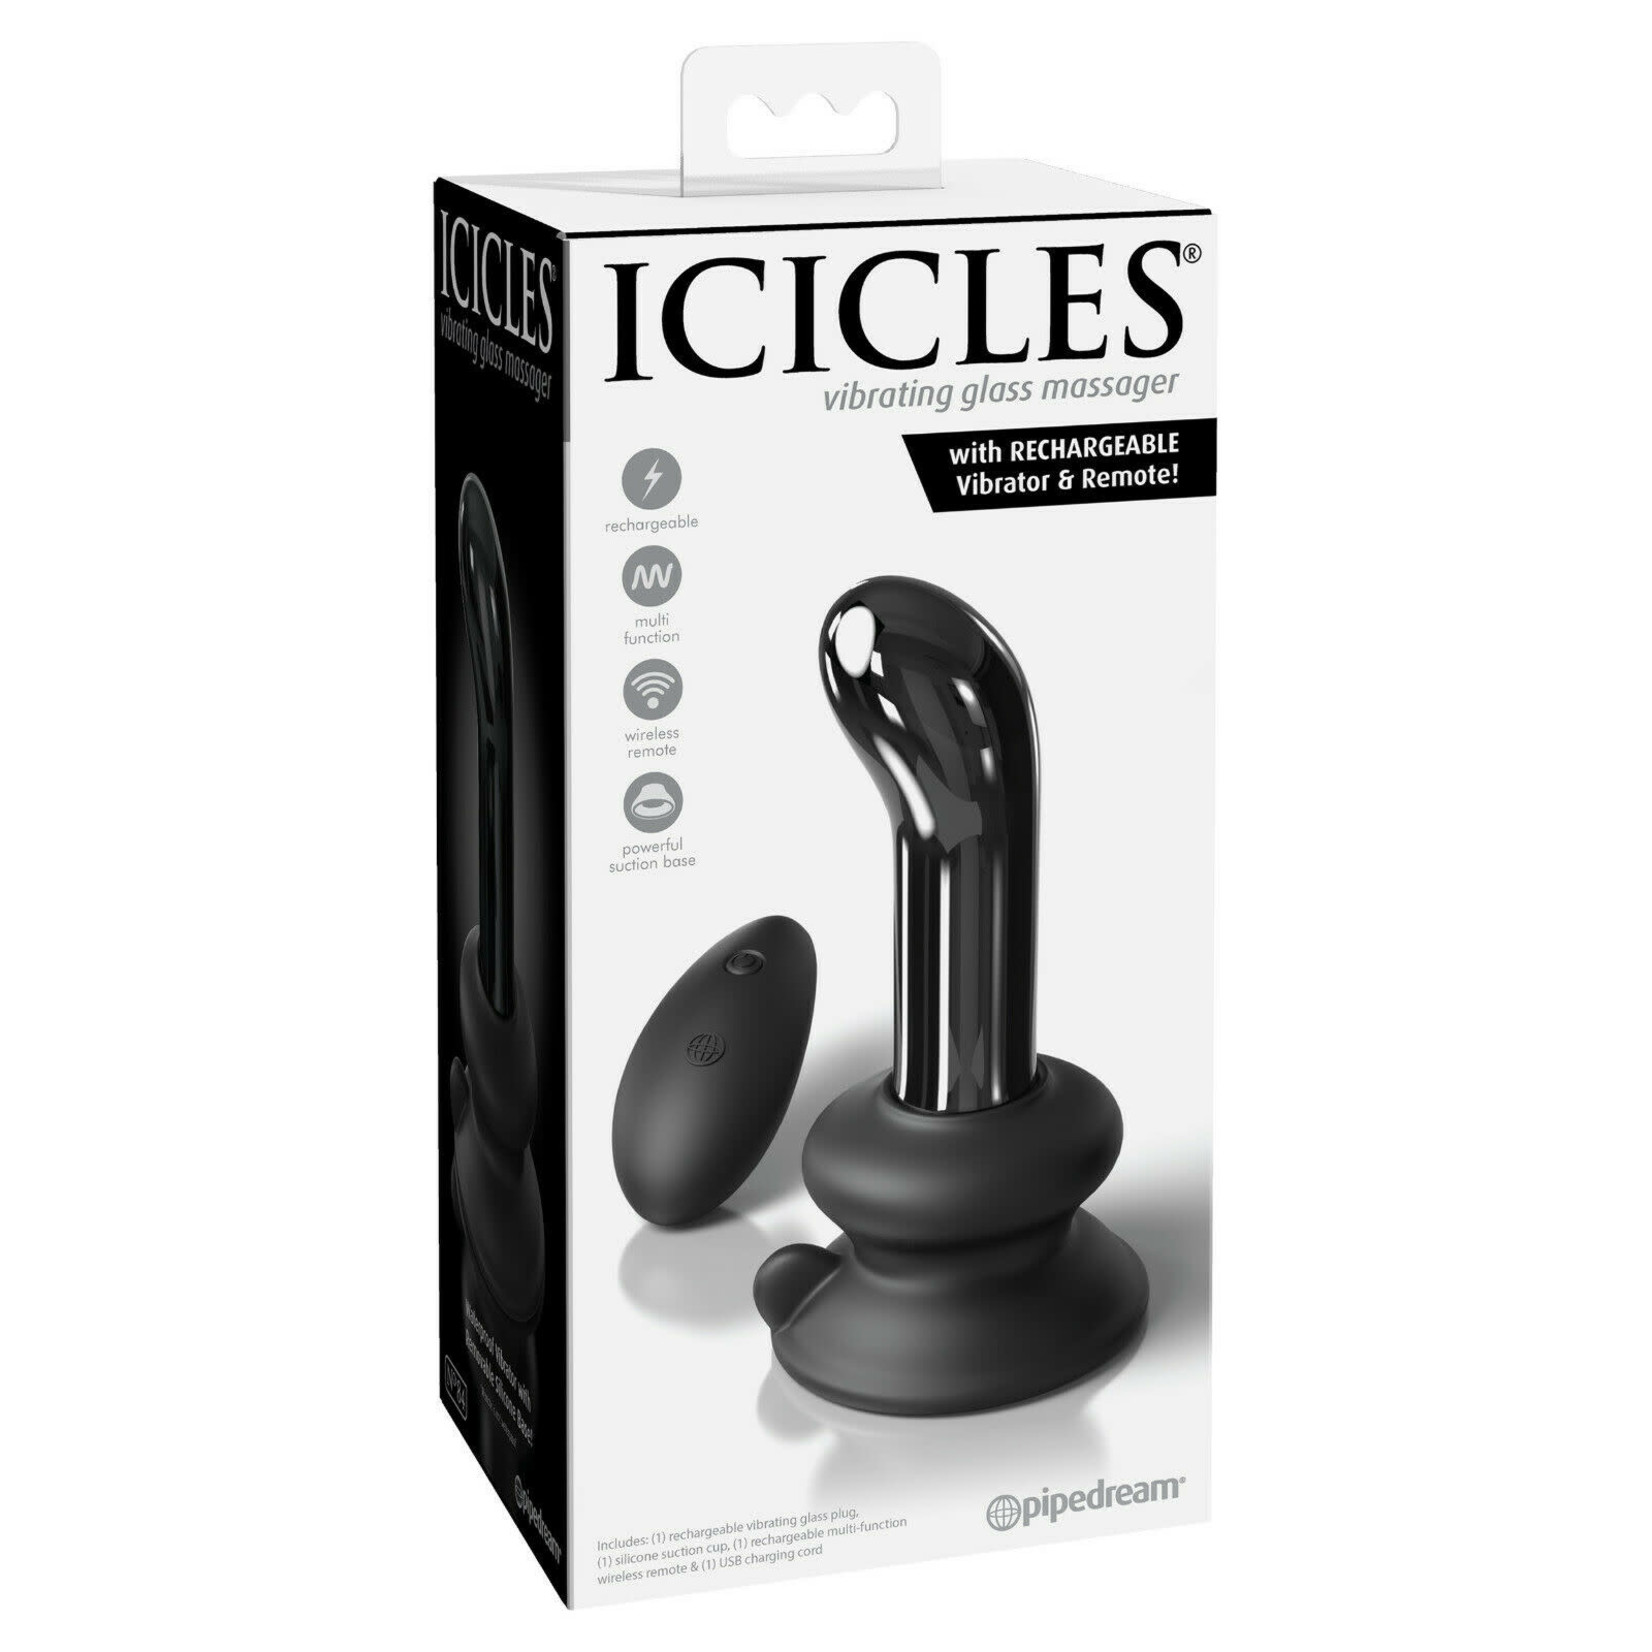 PIPEDREAM ICICLES NO.84 - RECHARGEABLE VIBRATOR & REMOTE